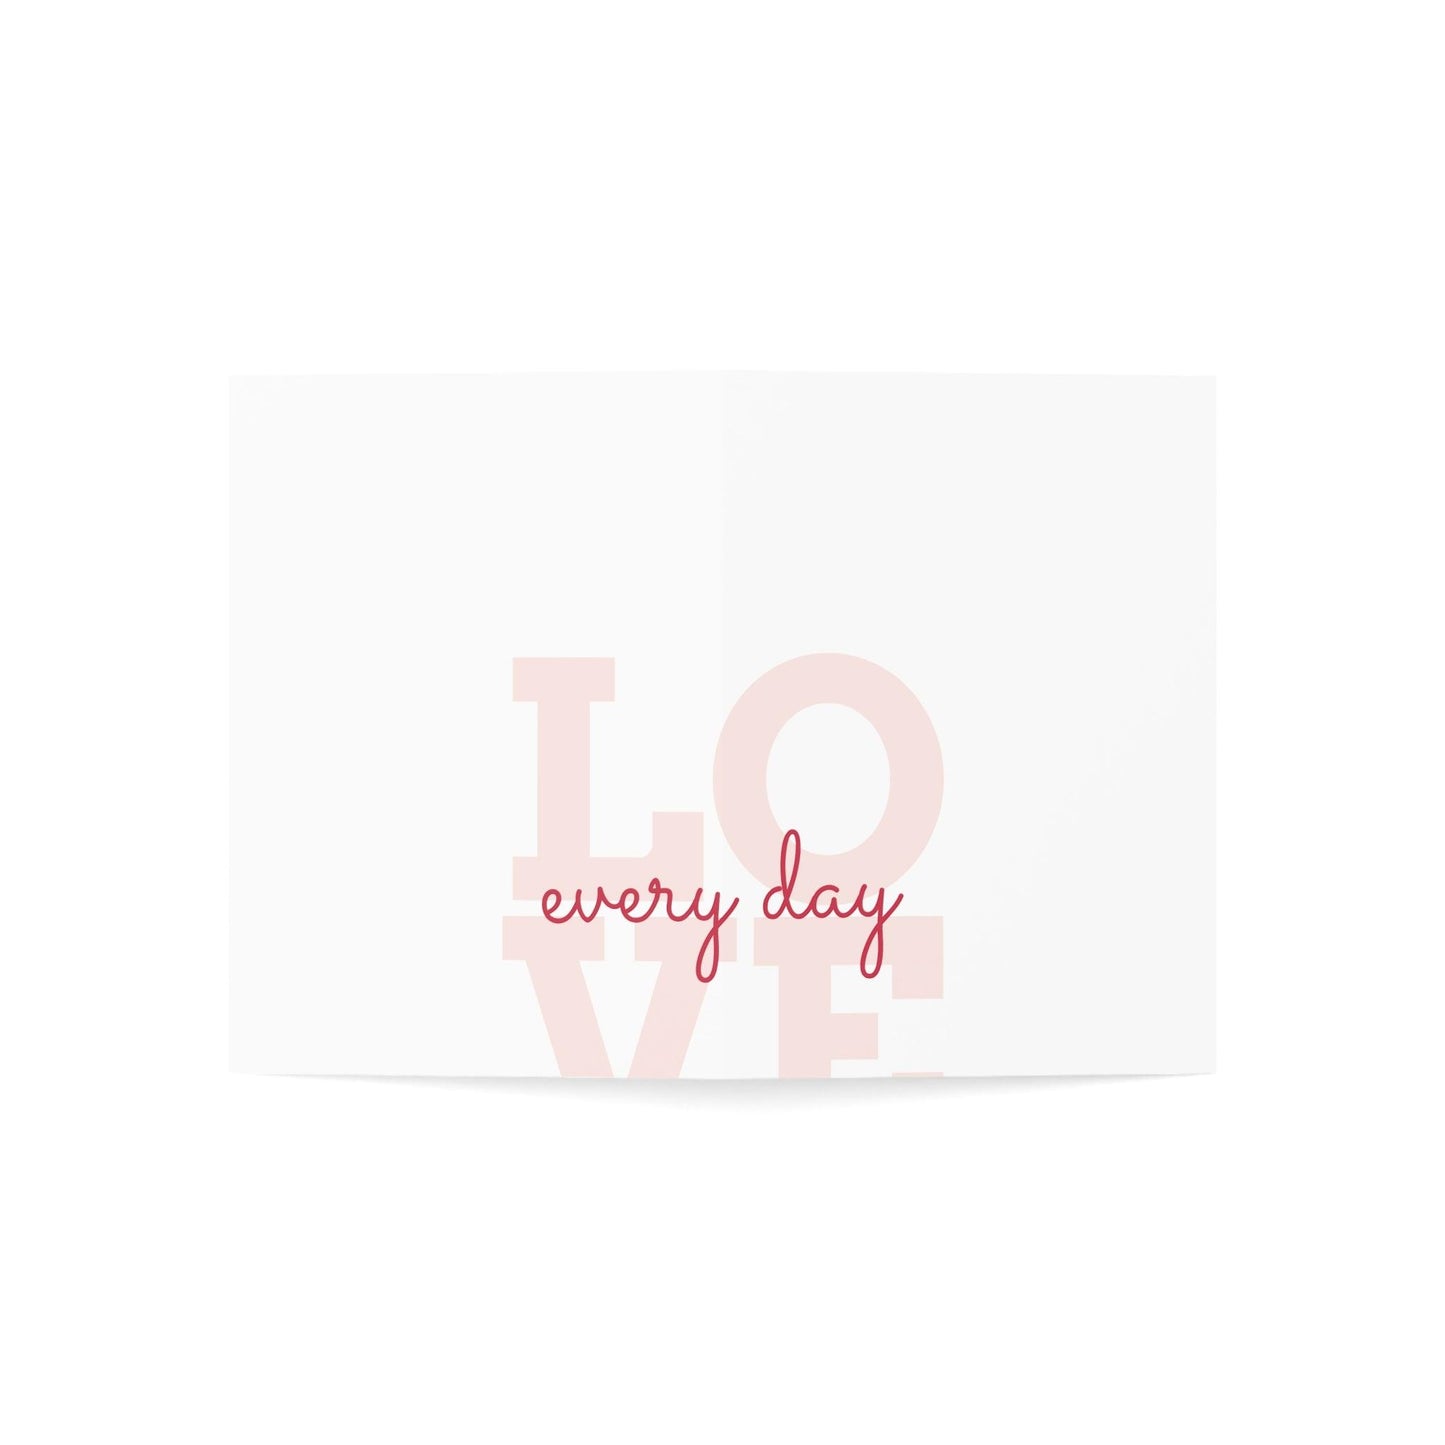 Love every day Greeting Cards (1, 10, 30, and 50pcs) Valentine's Day Holiday, Anytime - Lizard Vigilante